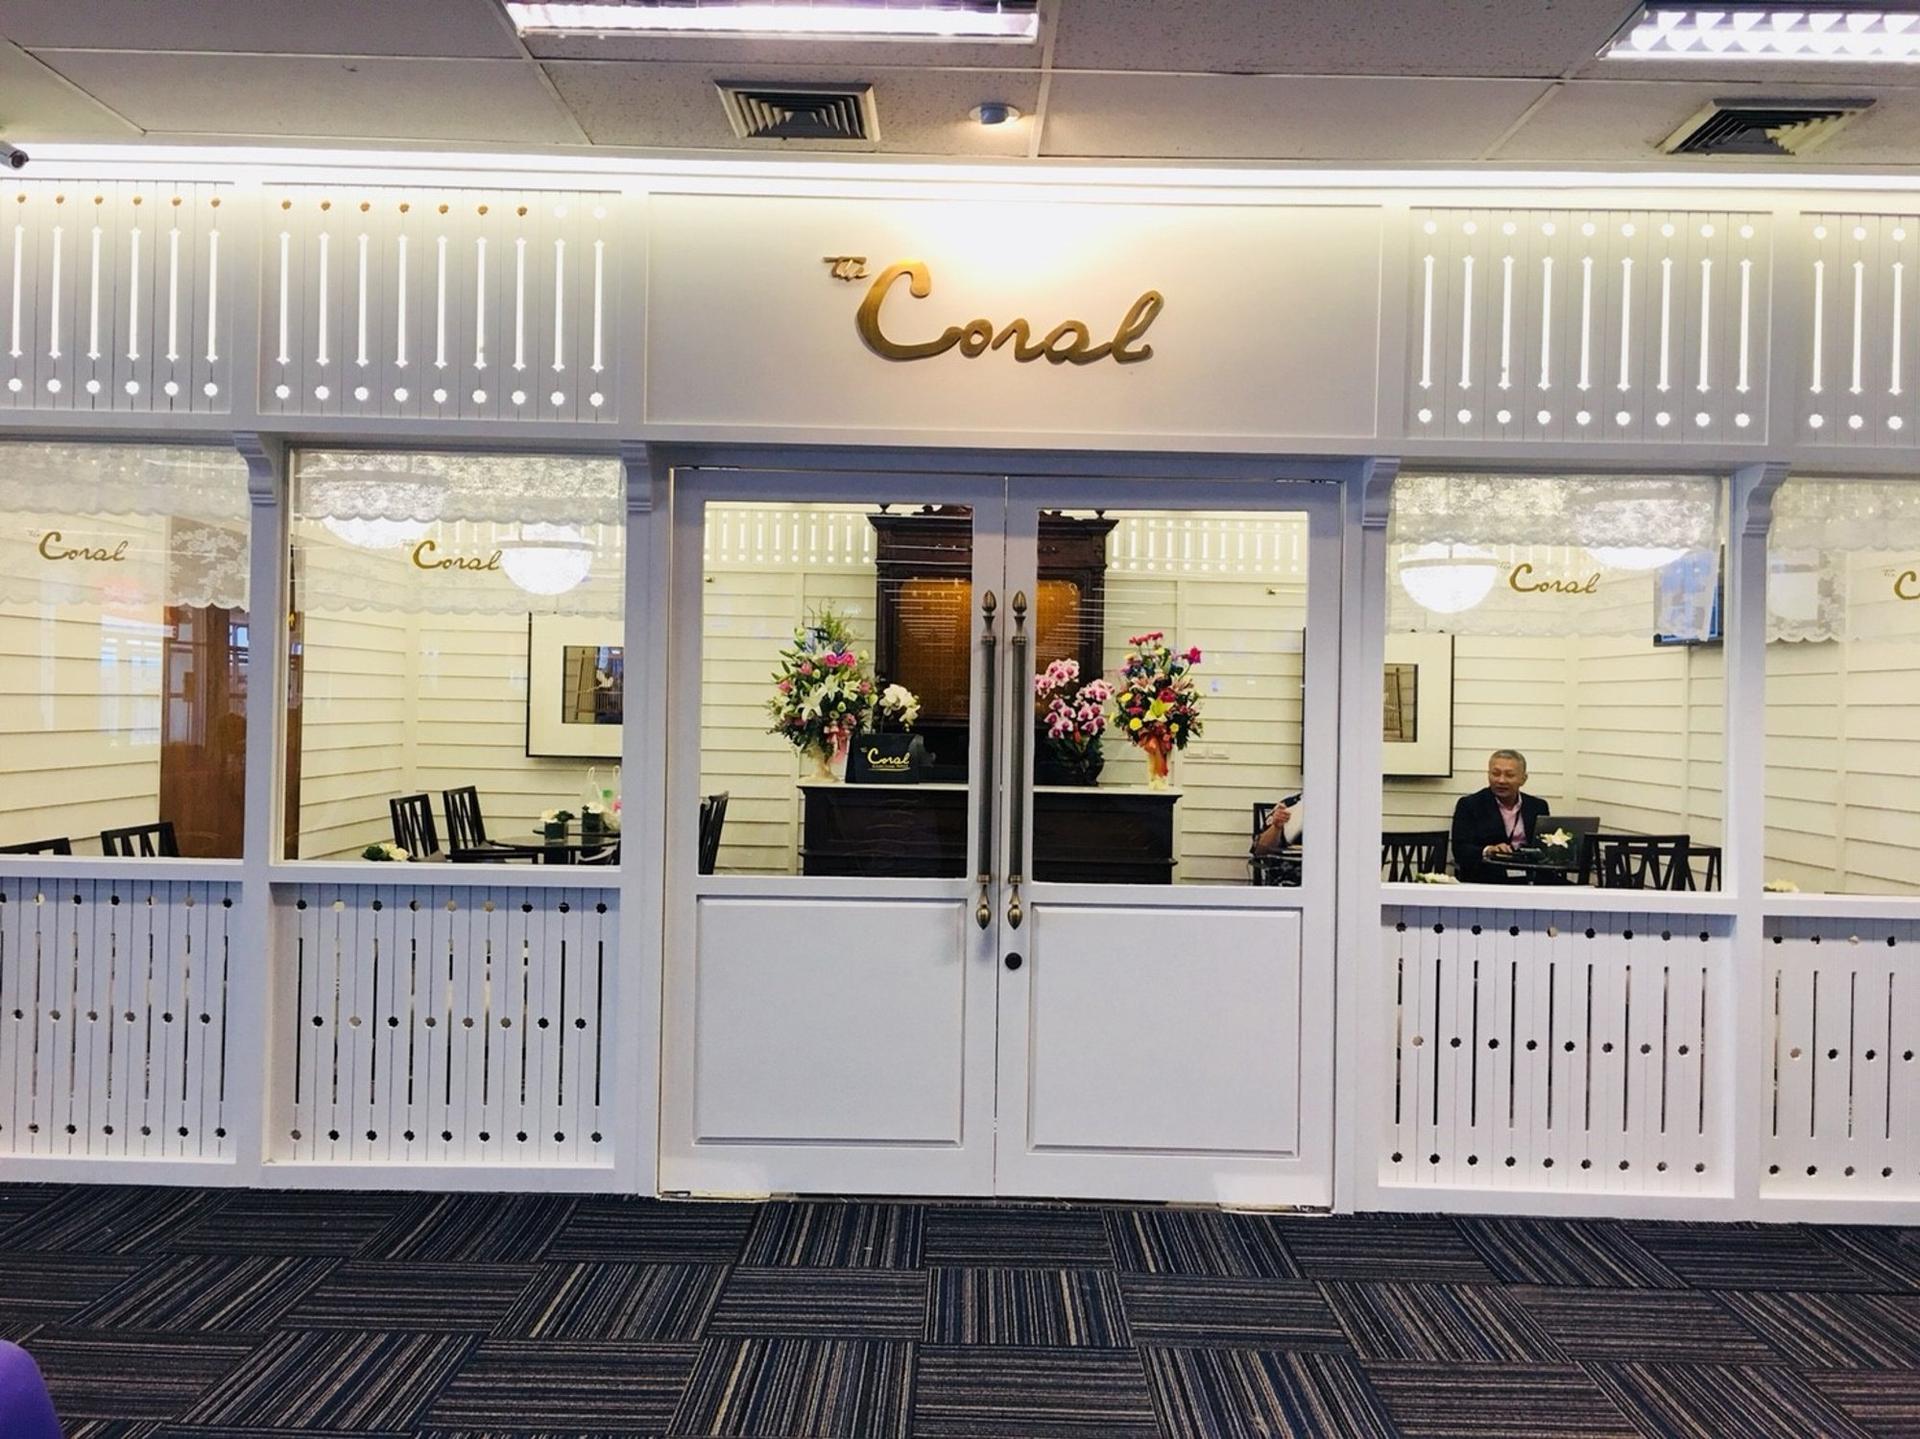 The Coral Executive Lounge image 9 of 30